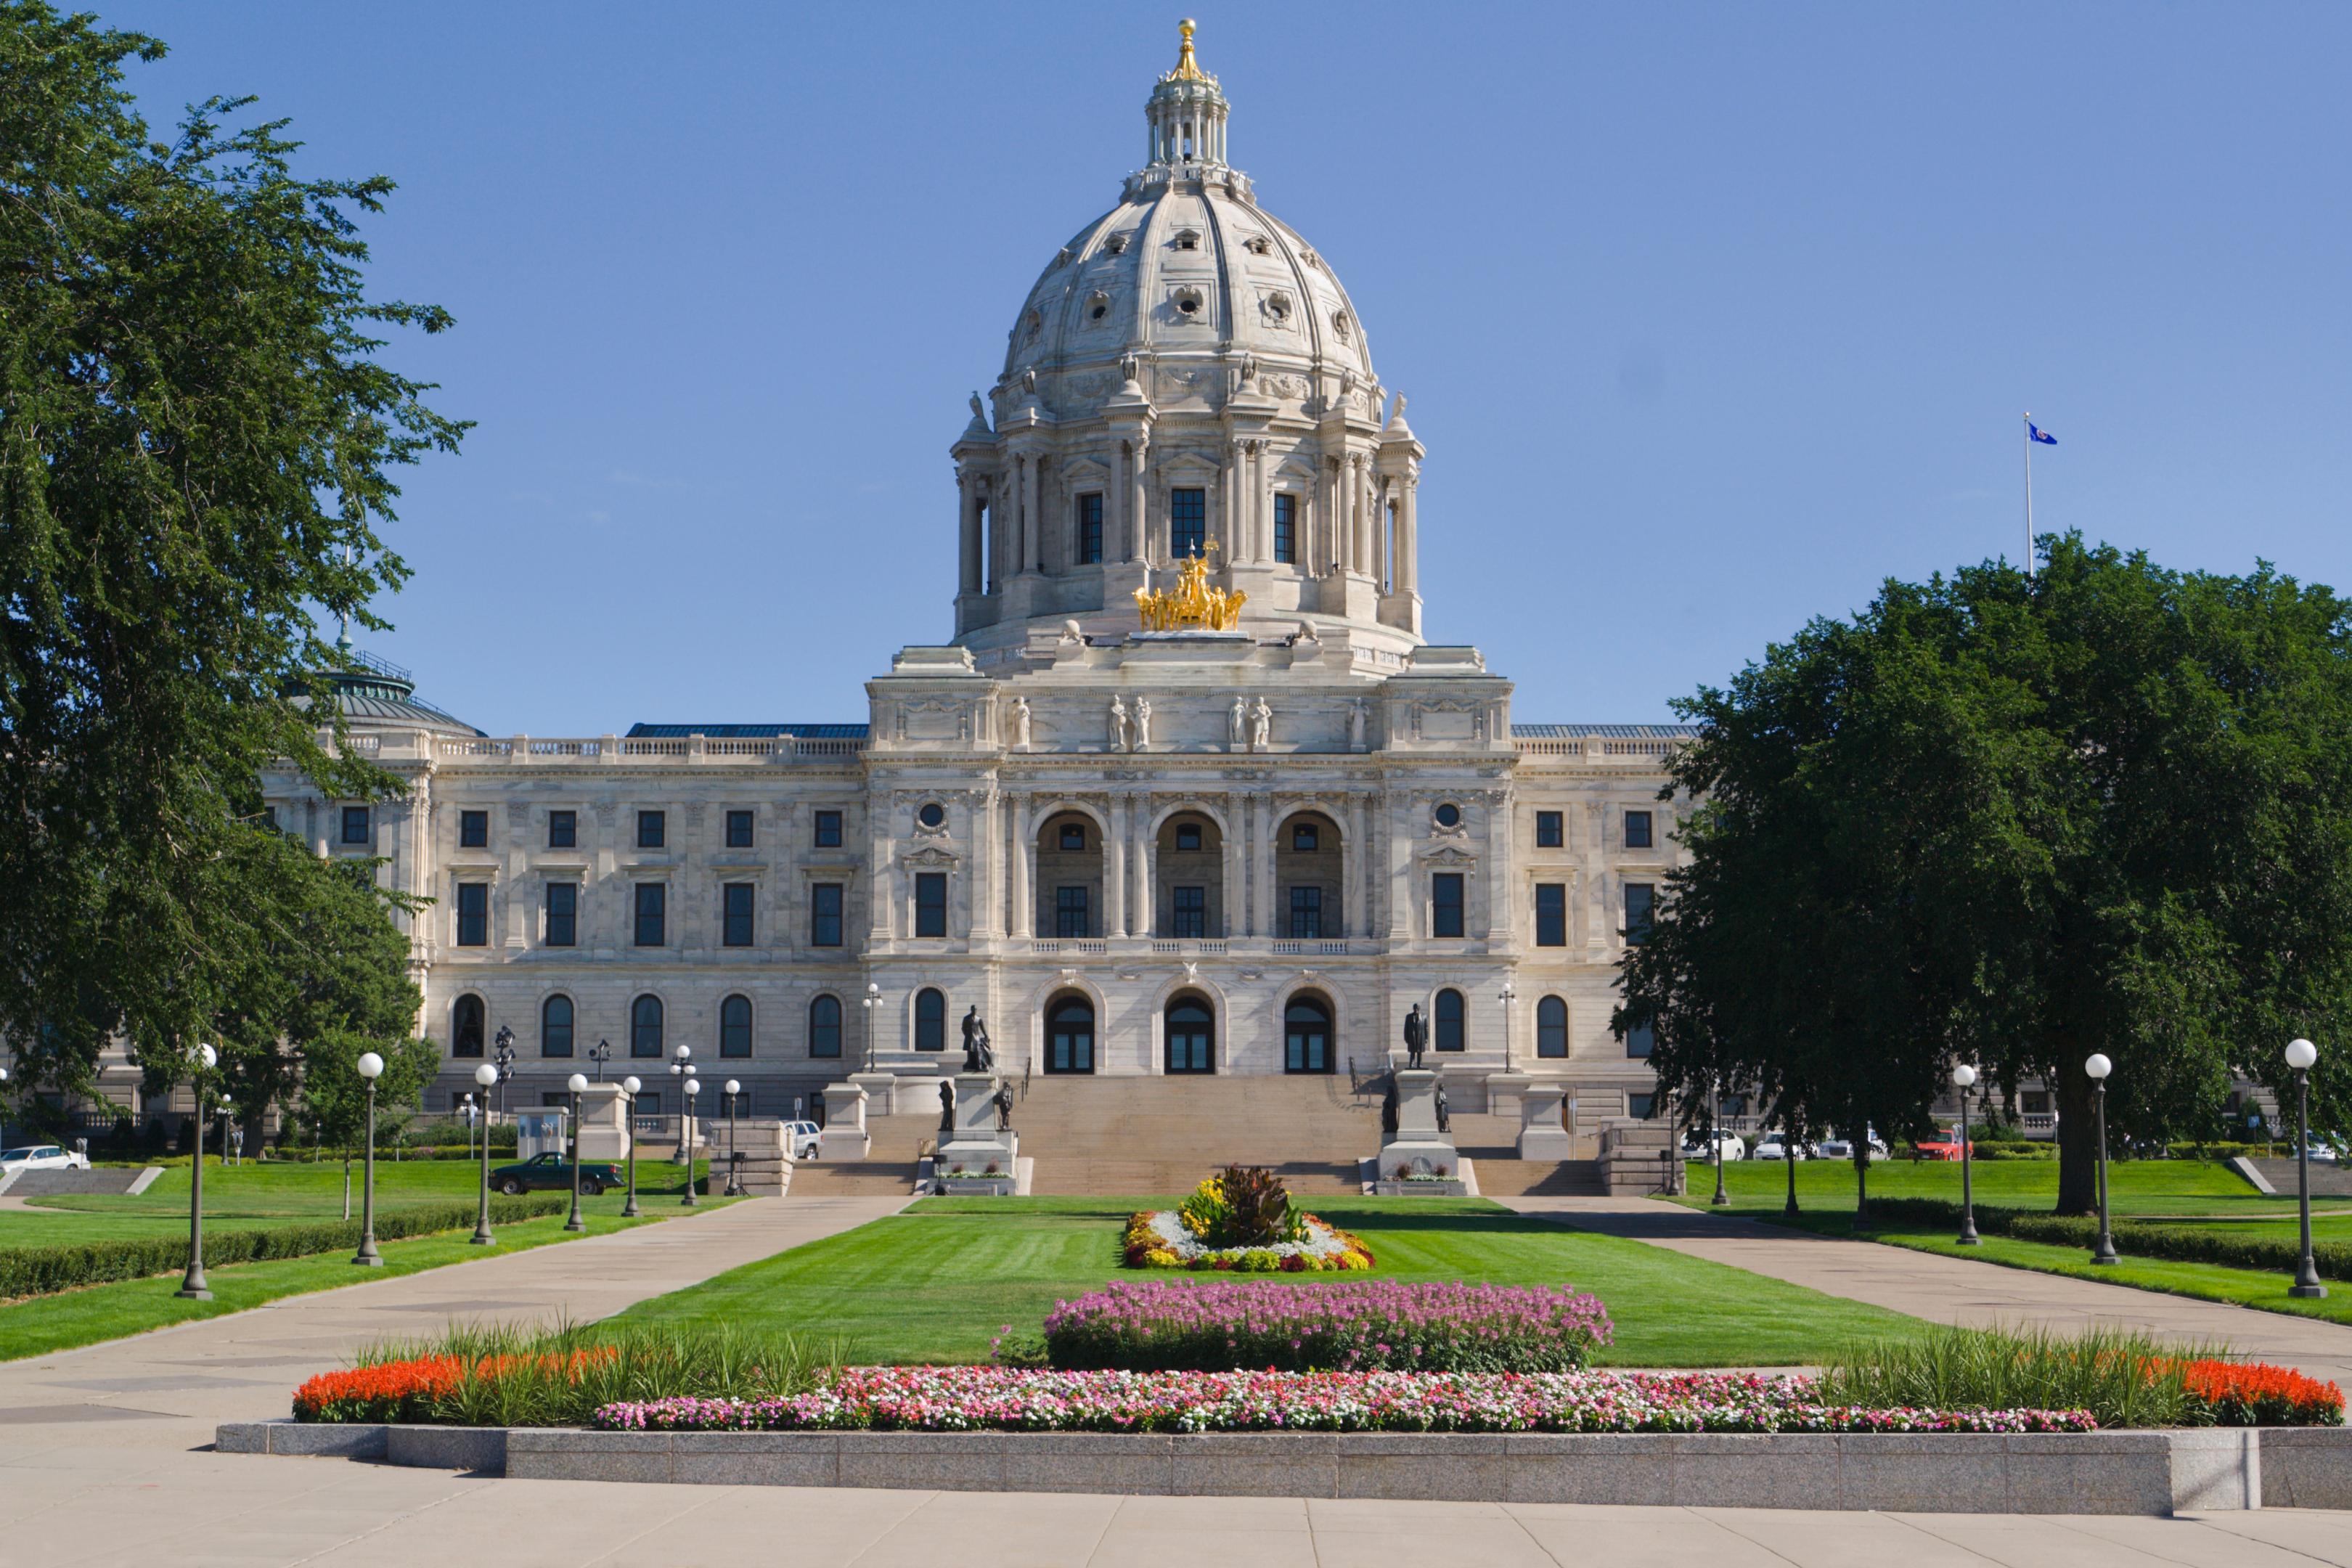 Front entrance approach of the Minnesota State Capitol building in St. Paul, Minnesota